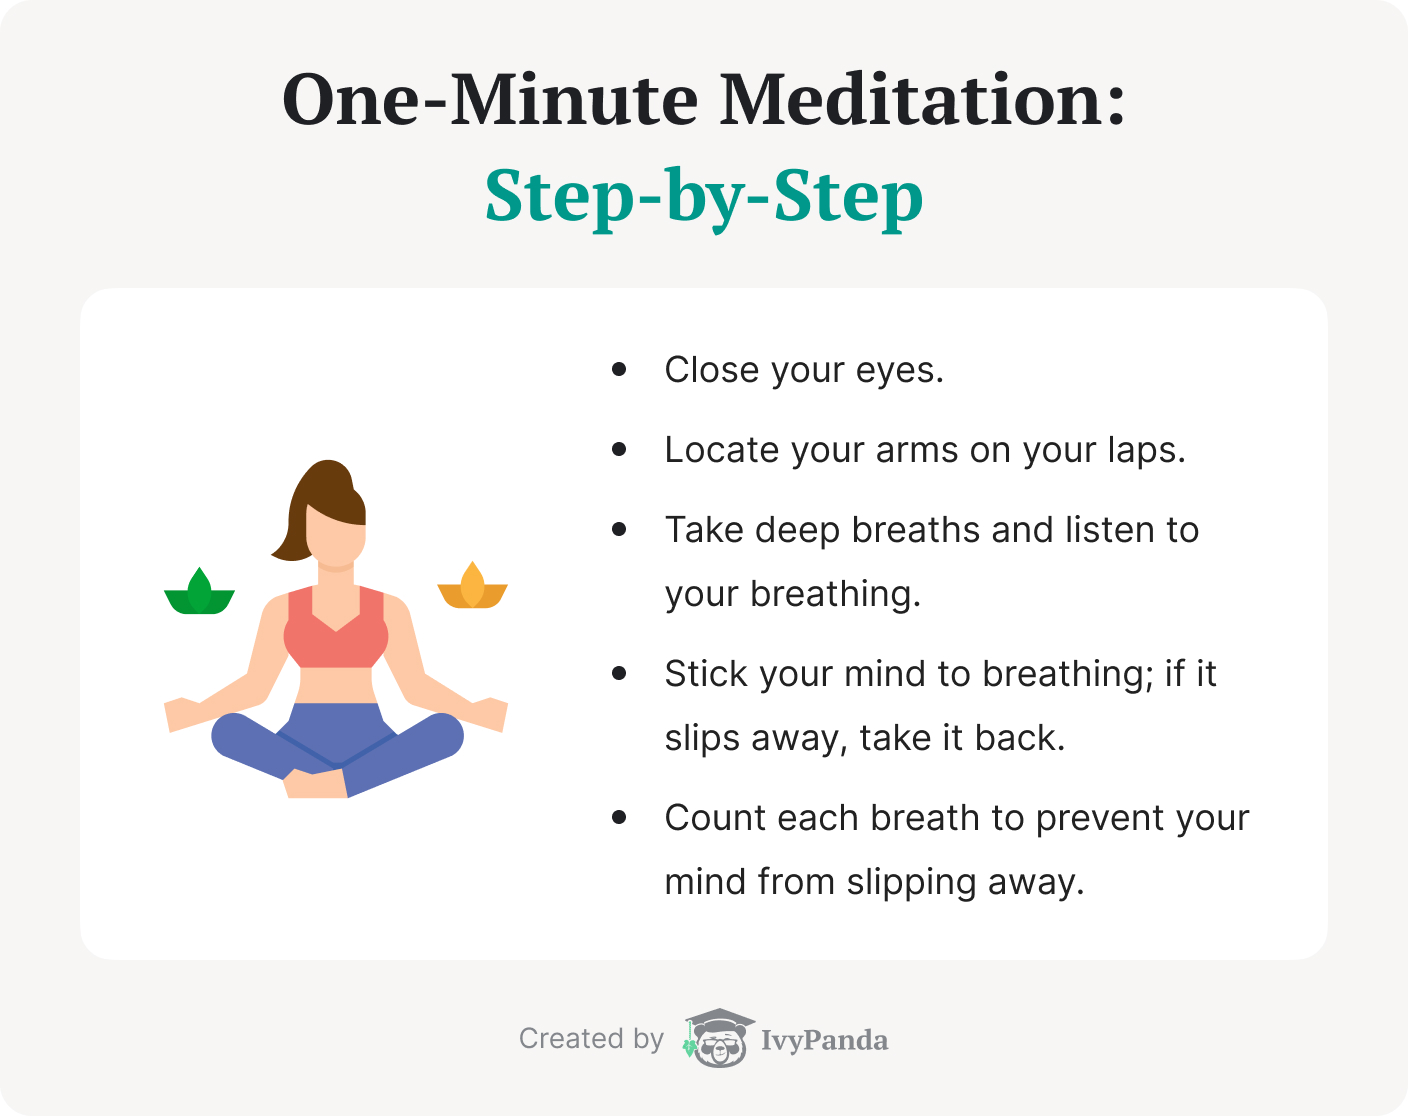 One-minutemeditation rules for resting.